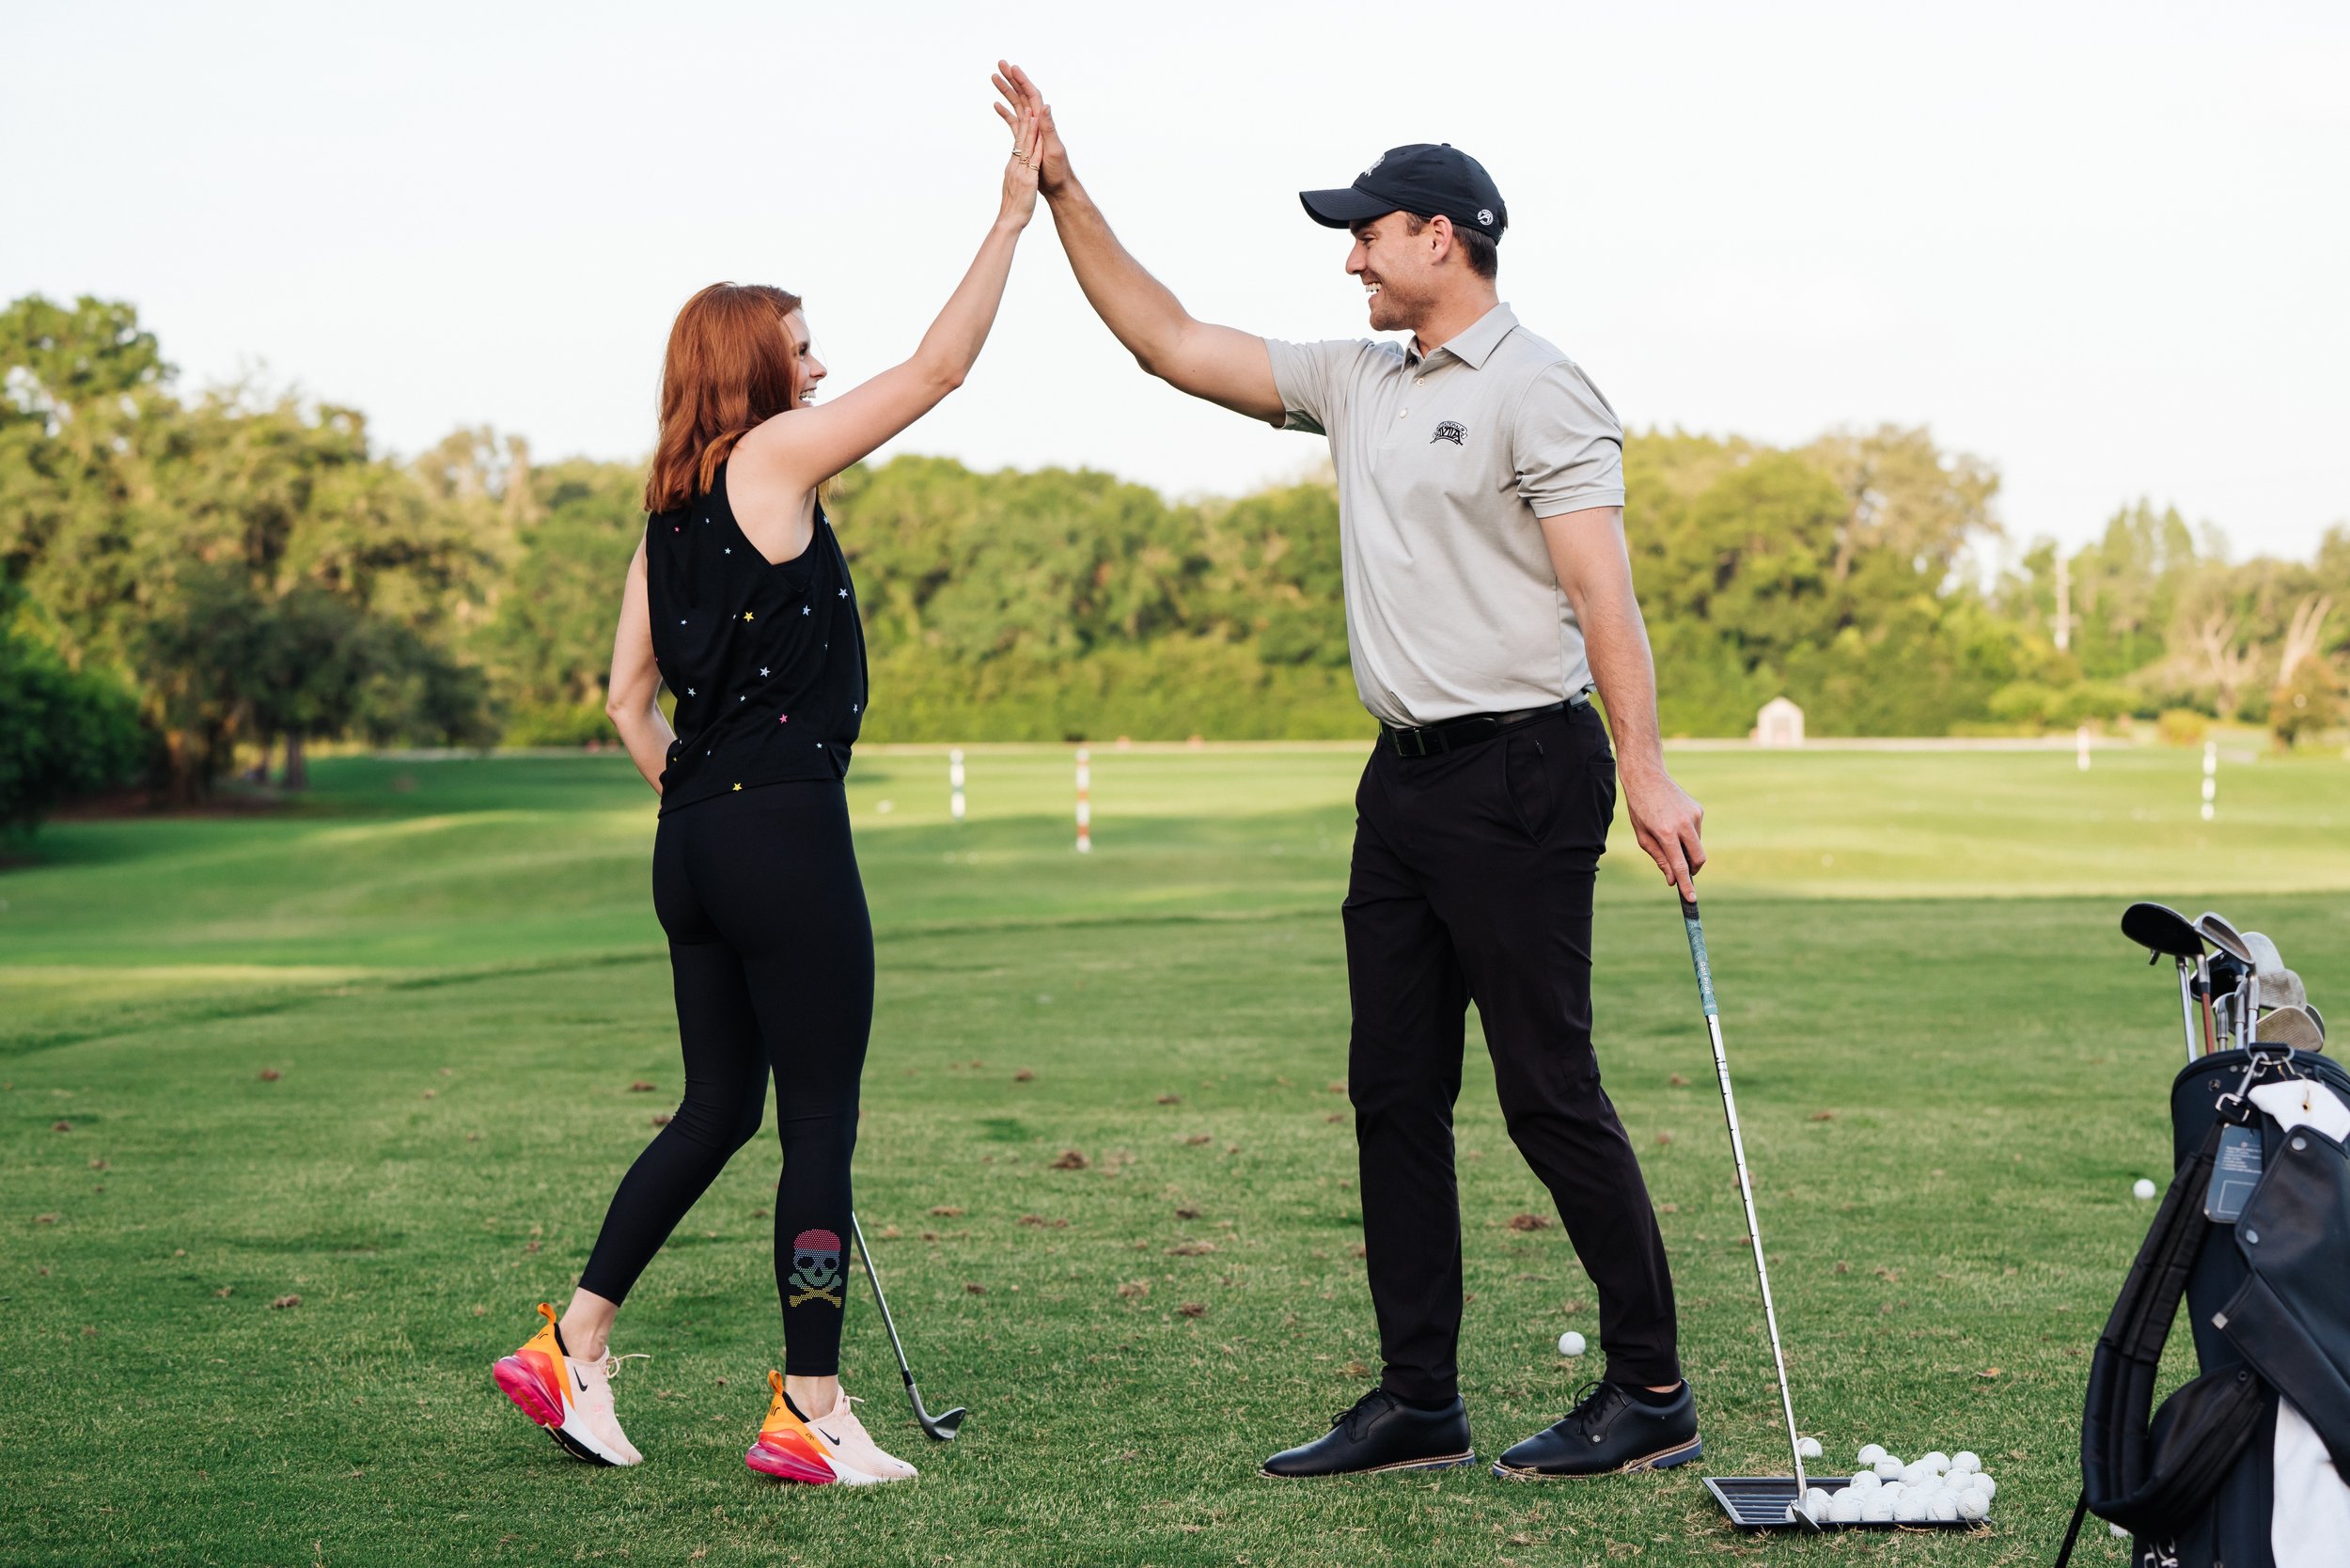 Try Something New: Golf Lesson With Tyler! — The Happy Place